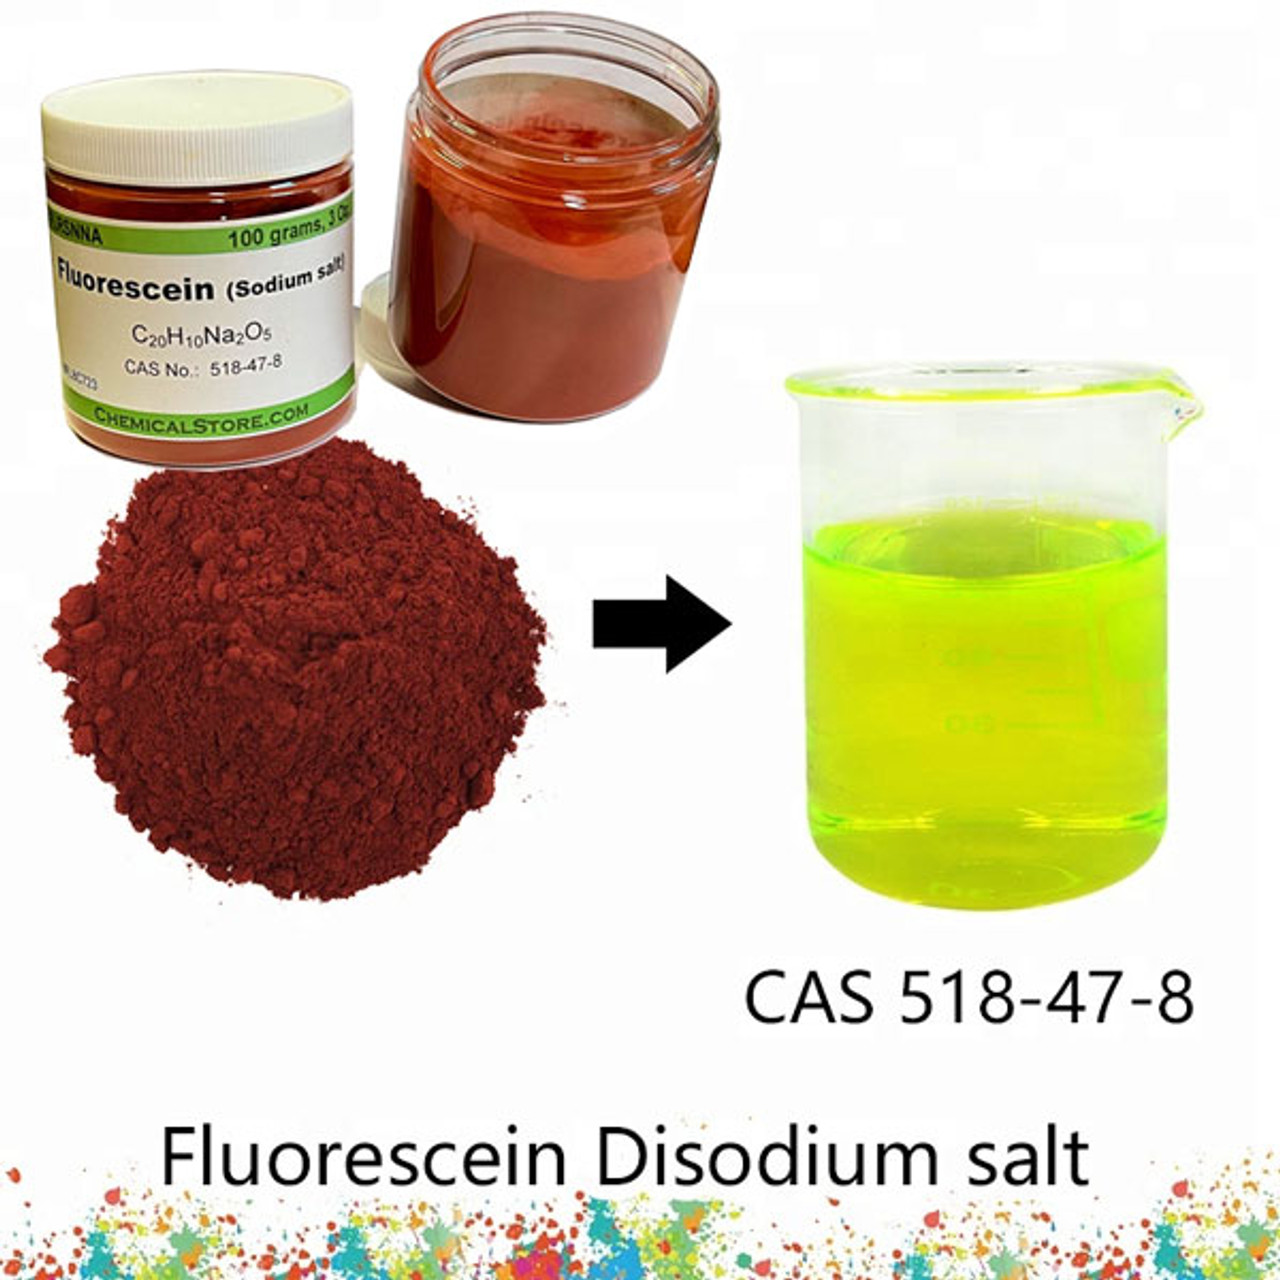 An example of sodium-fluoresceine with a clear delineation of the